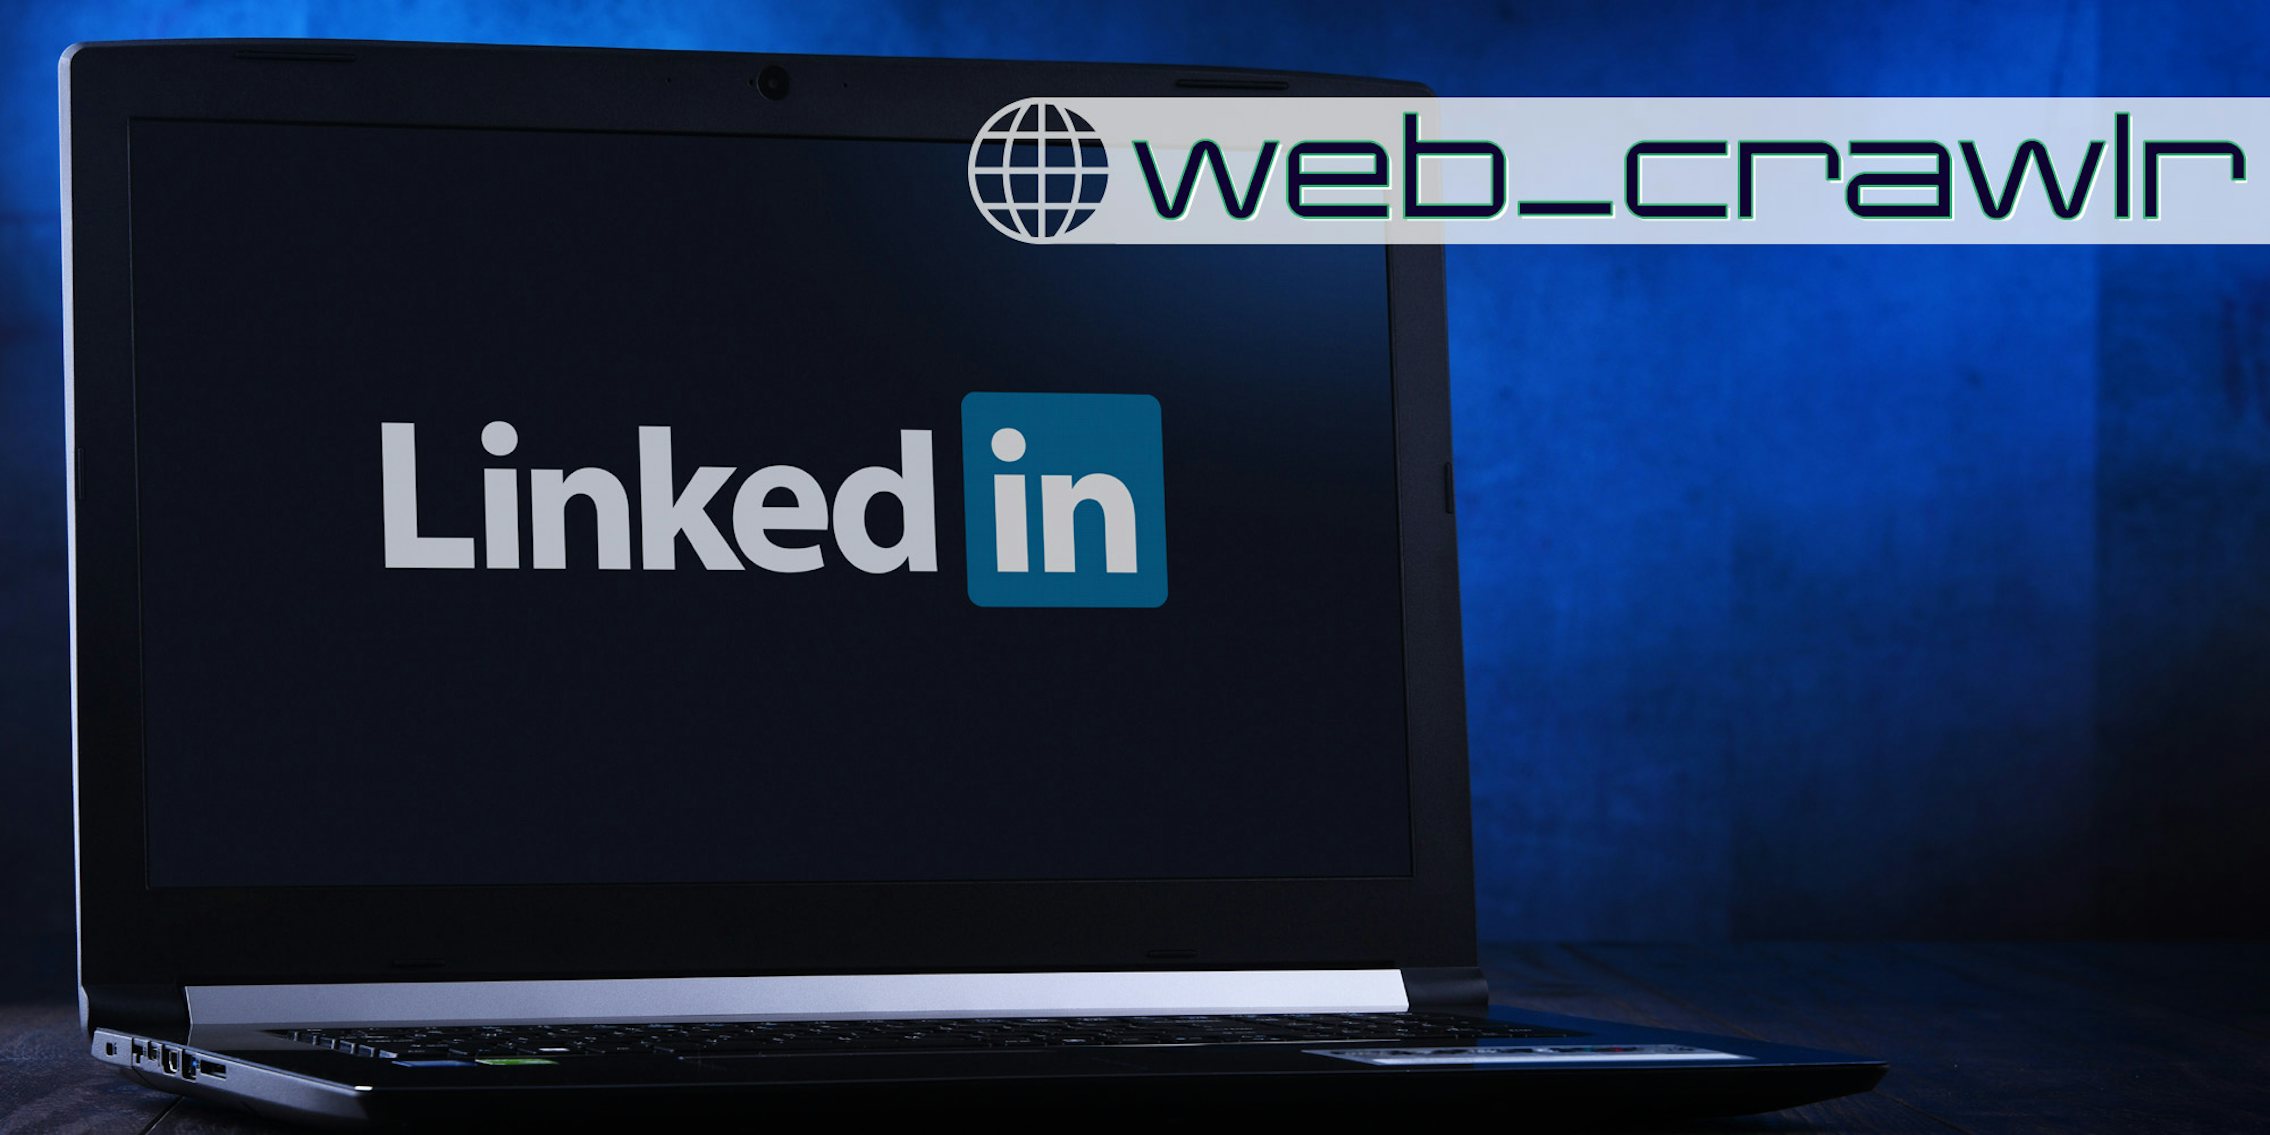 A laptop showing the LinkedIn logo on it. The Daily Dot newsletter web_crawlr logo is in the top right corner.